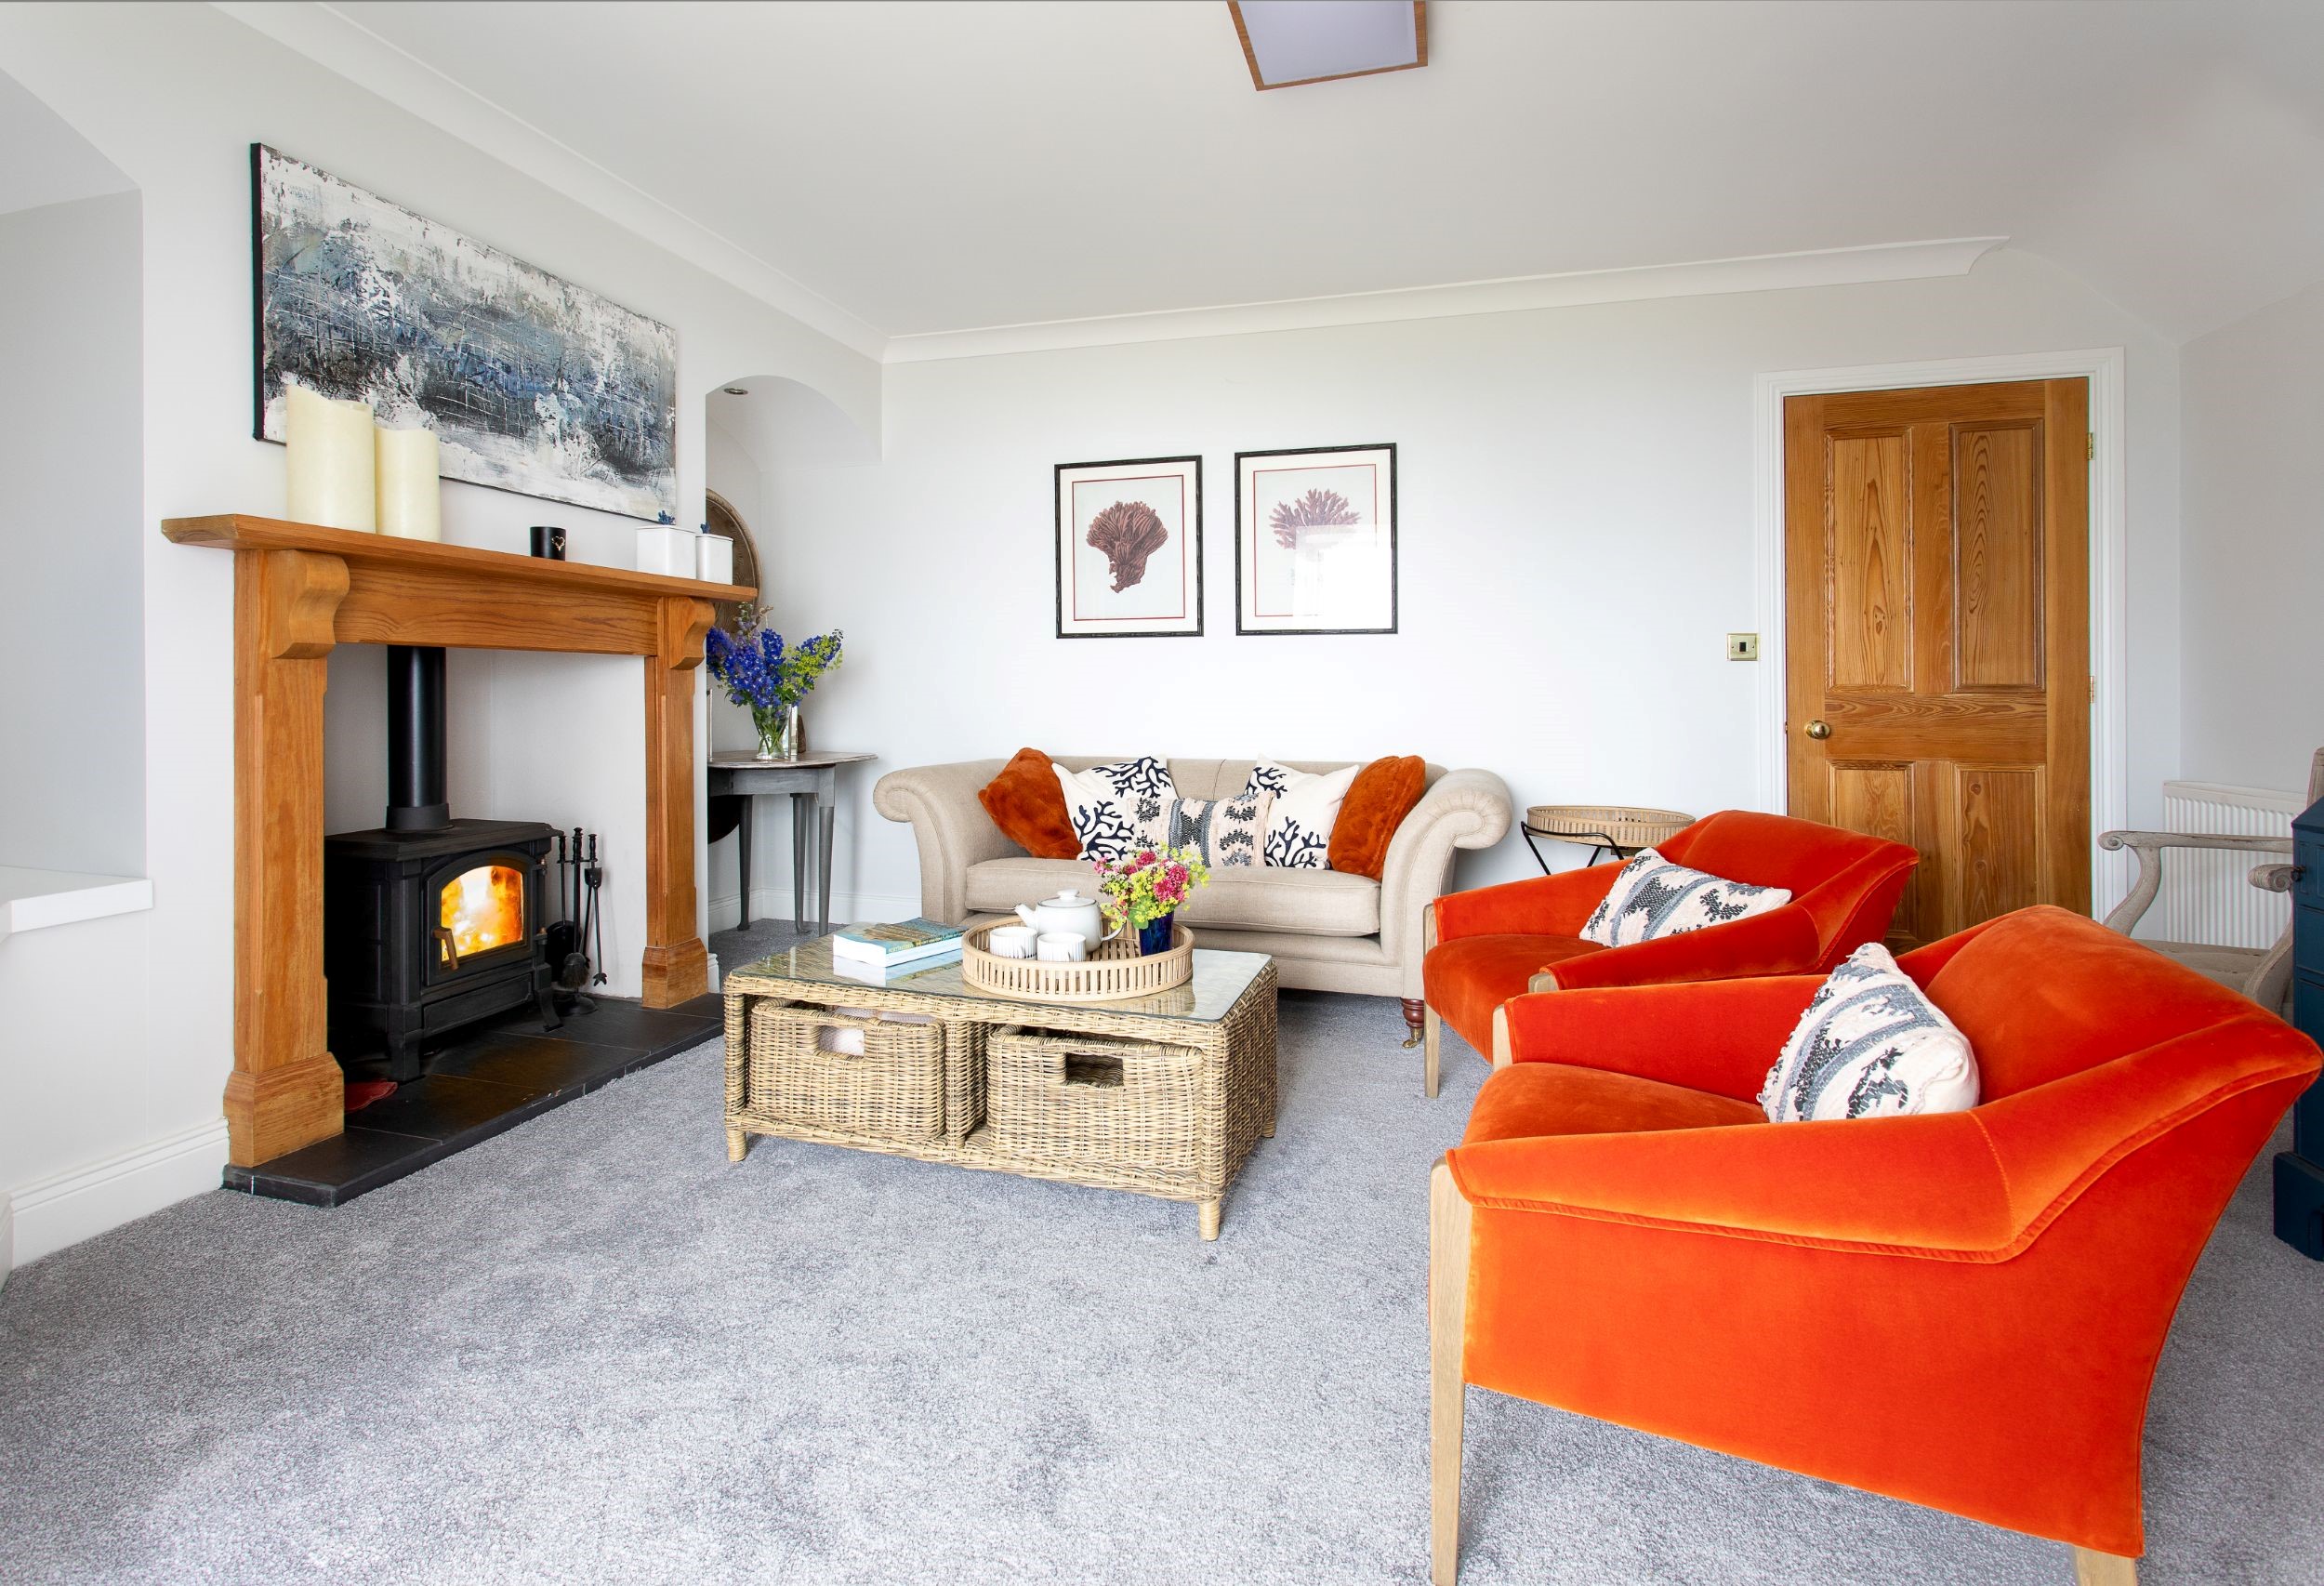 Sea Breeze - bright and cosy sitting room with wood burner